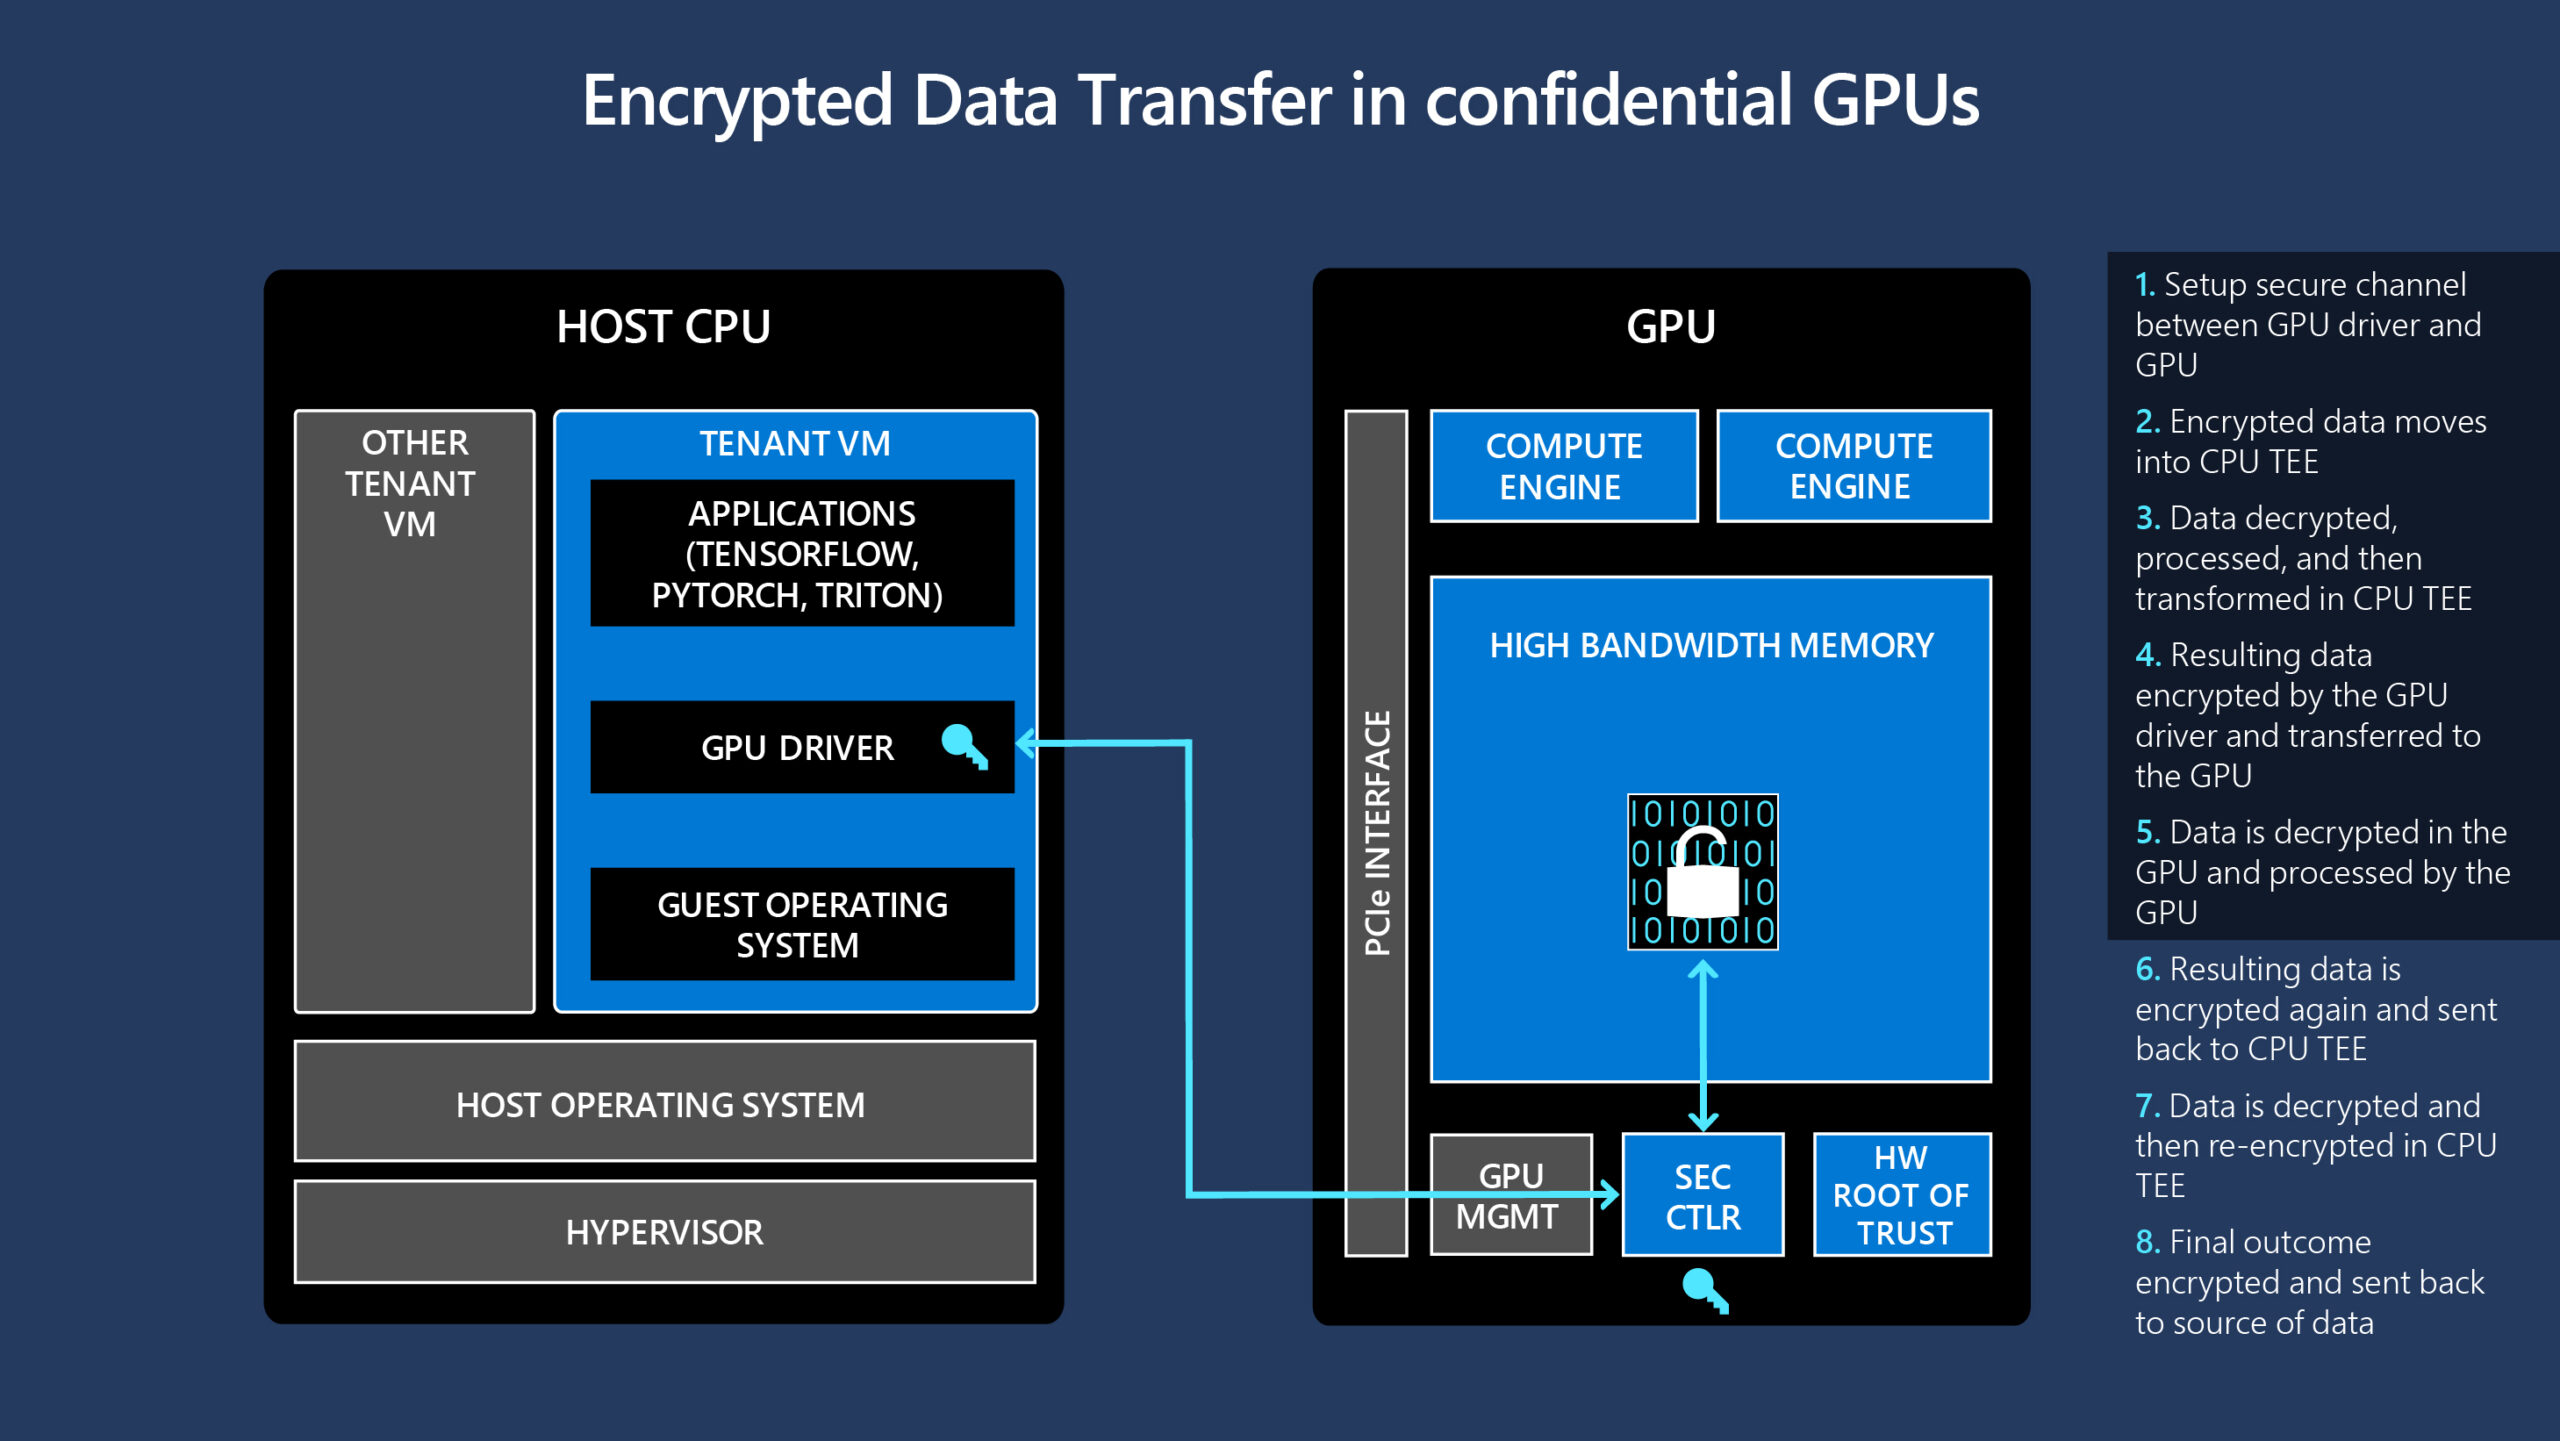 Graphic showing the process of how encrypted data is transferred between the GPU drive and the GPU through a secure channel. The GPU driver on the host CPU and the SEC2 microcontroller on the NVIDIA A100 Tensor Core GPU work together to achieve end-to-end encryption of data transfers